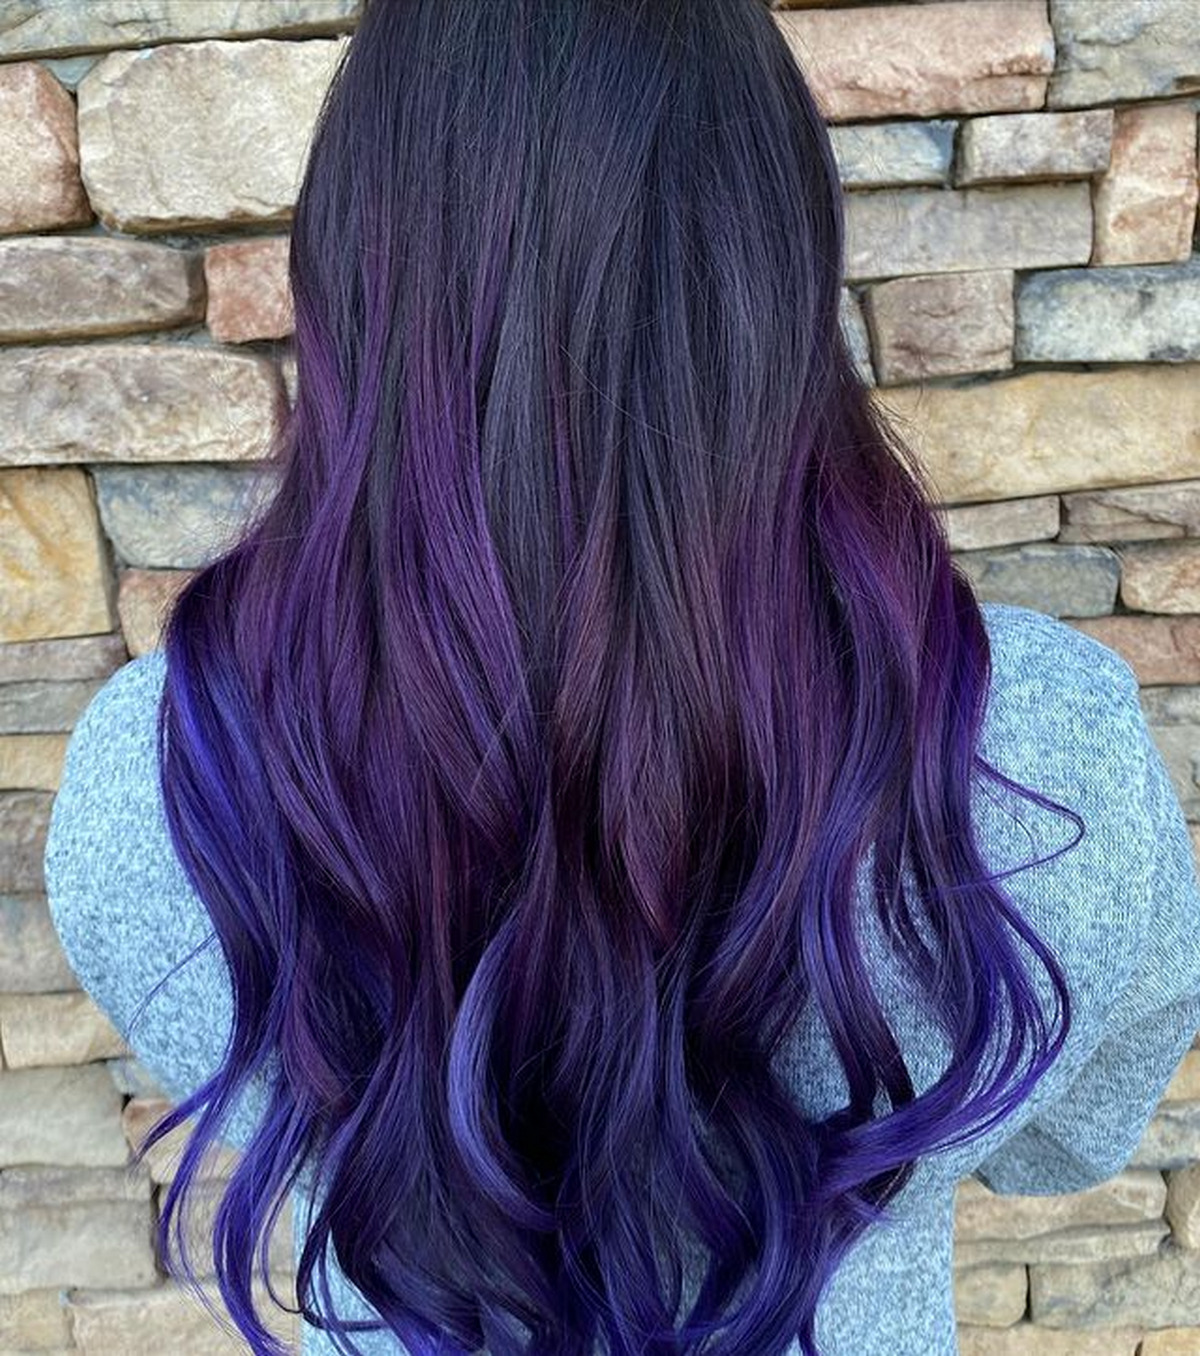 Waves of Blue and Purple Ombre